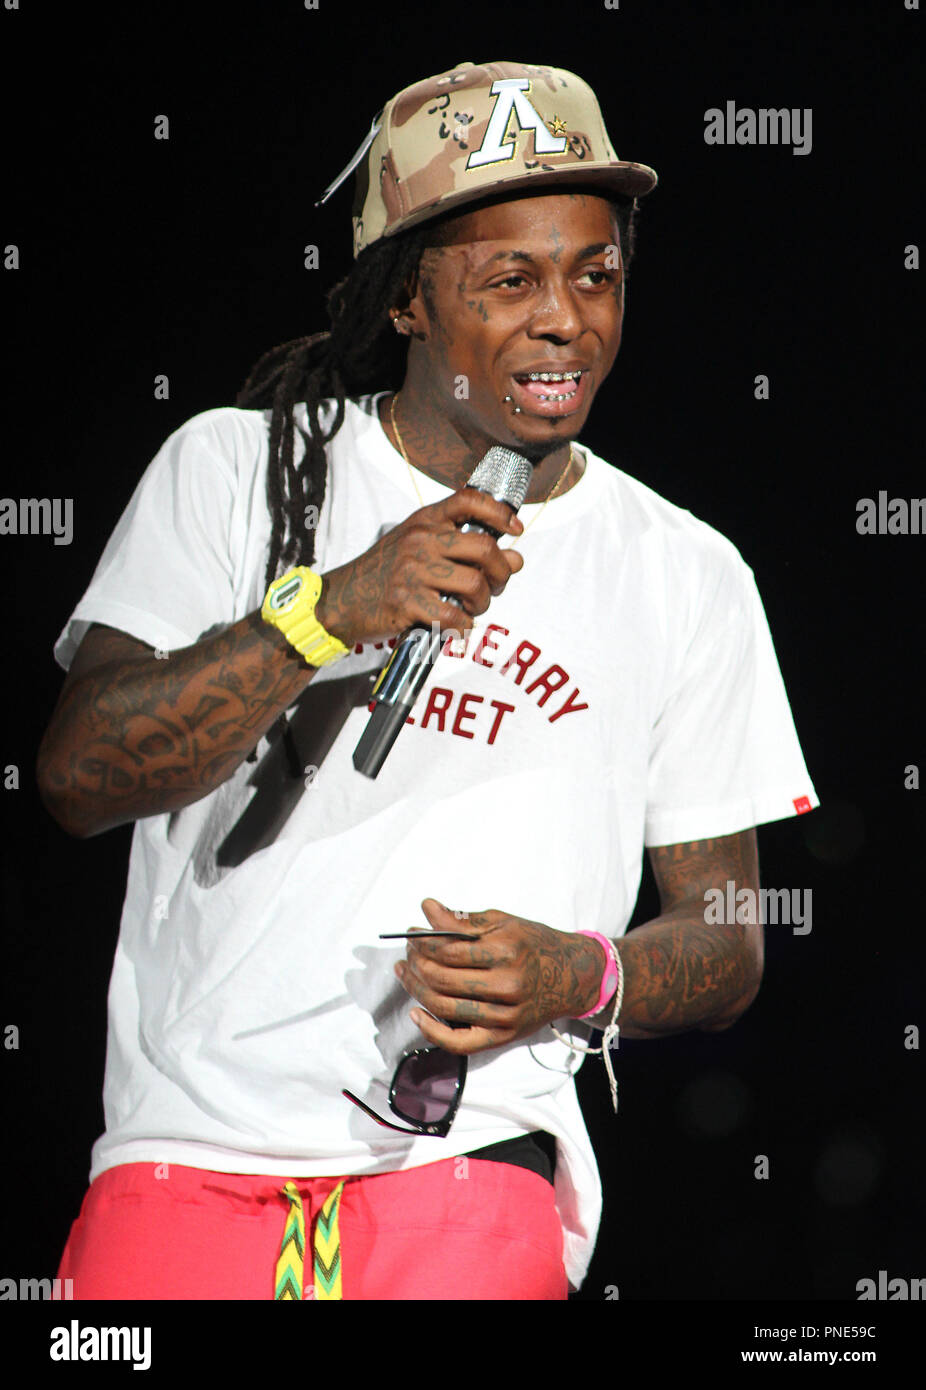 Lil Wayne performs in concert at the Cruzan Amphitheater in West Palm Beach, Florida on August 2, 2011. Stock Photo